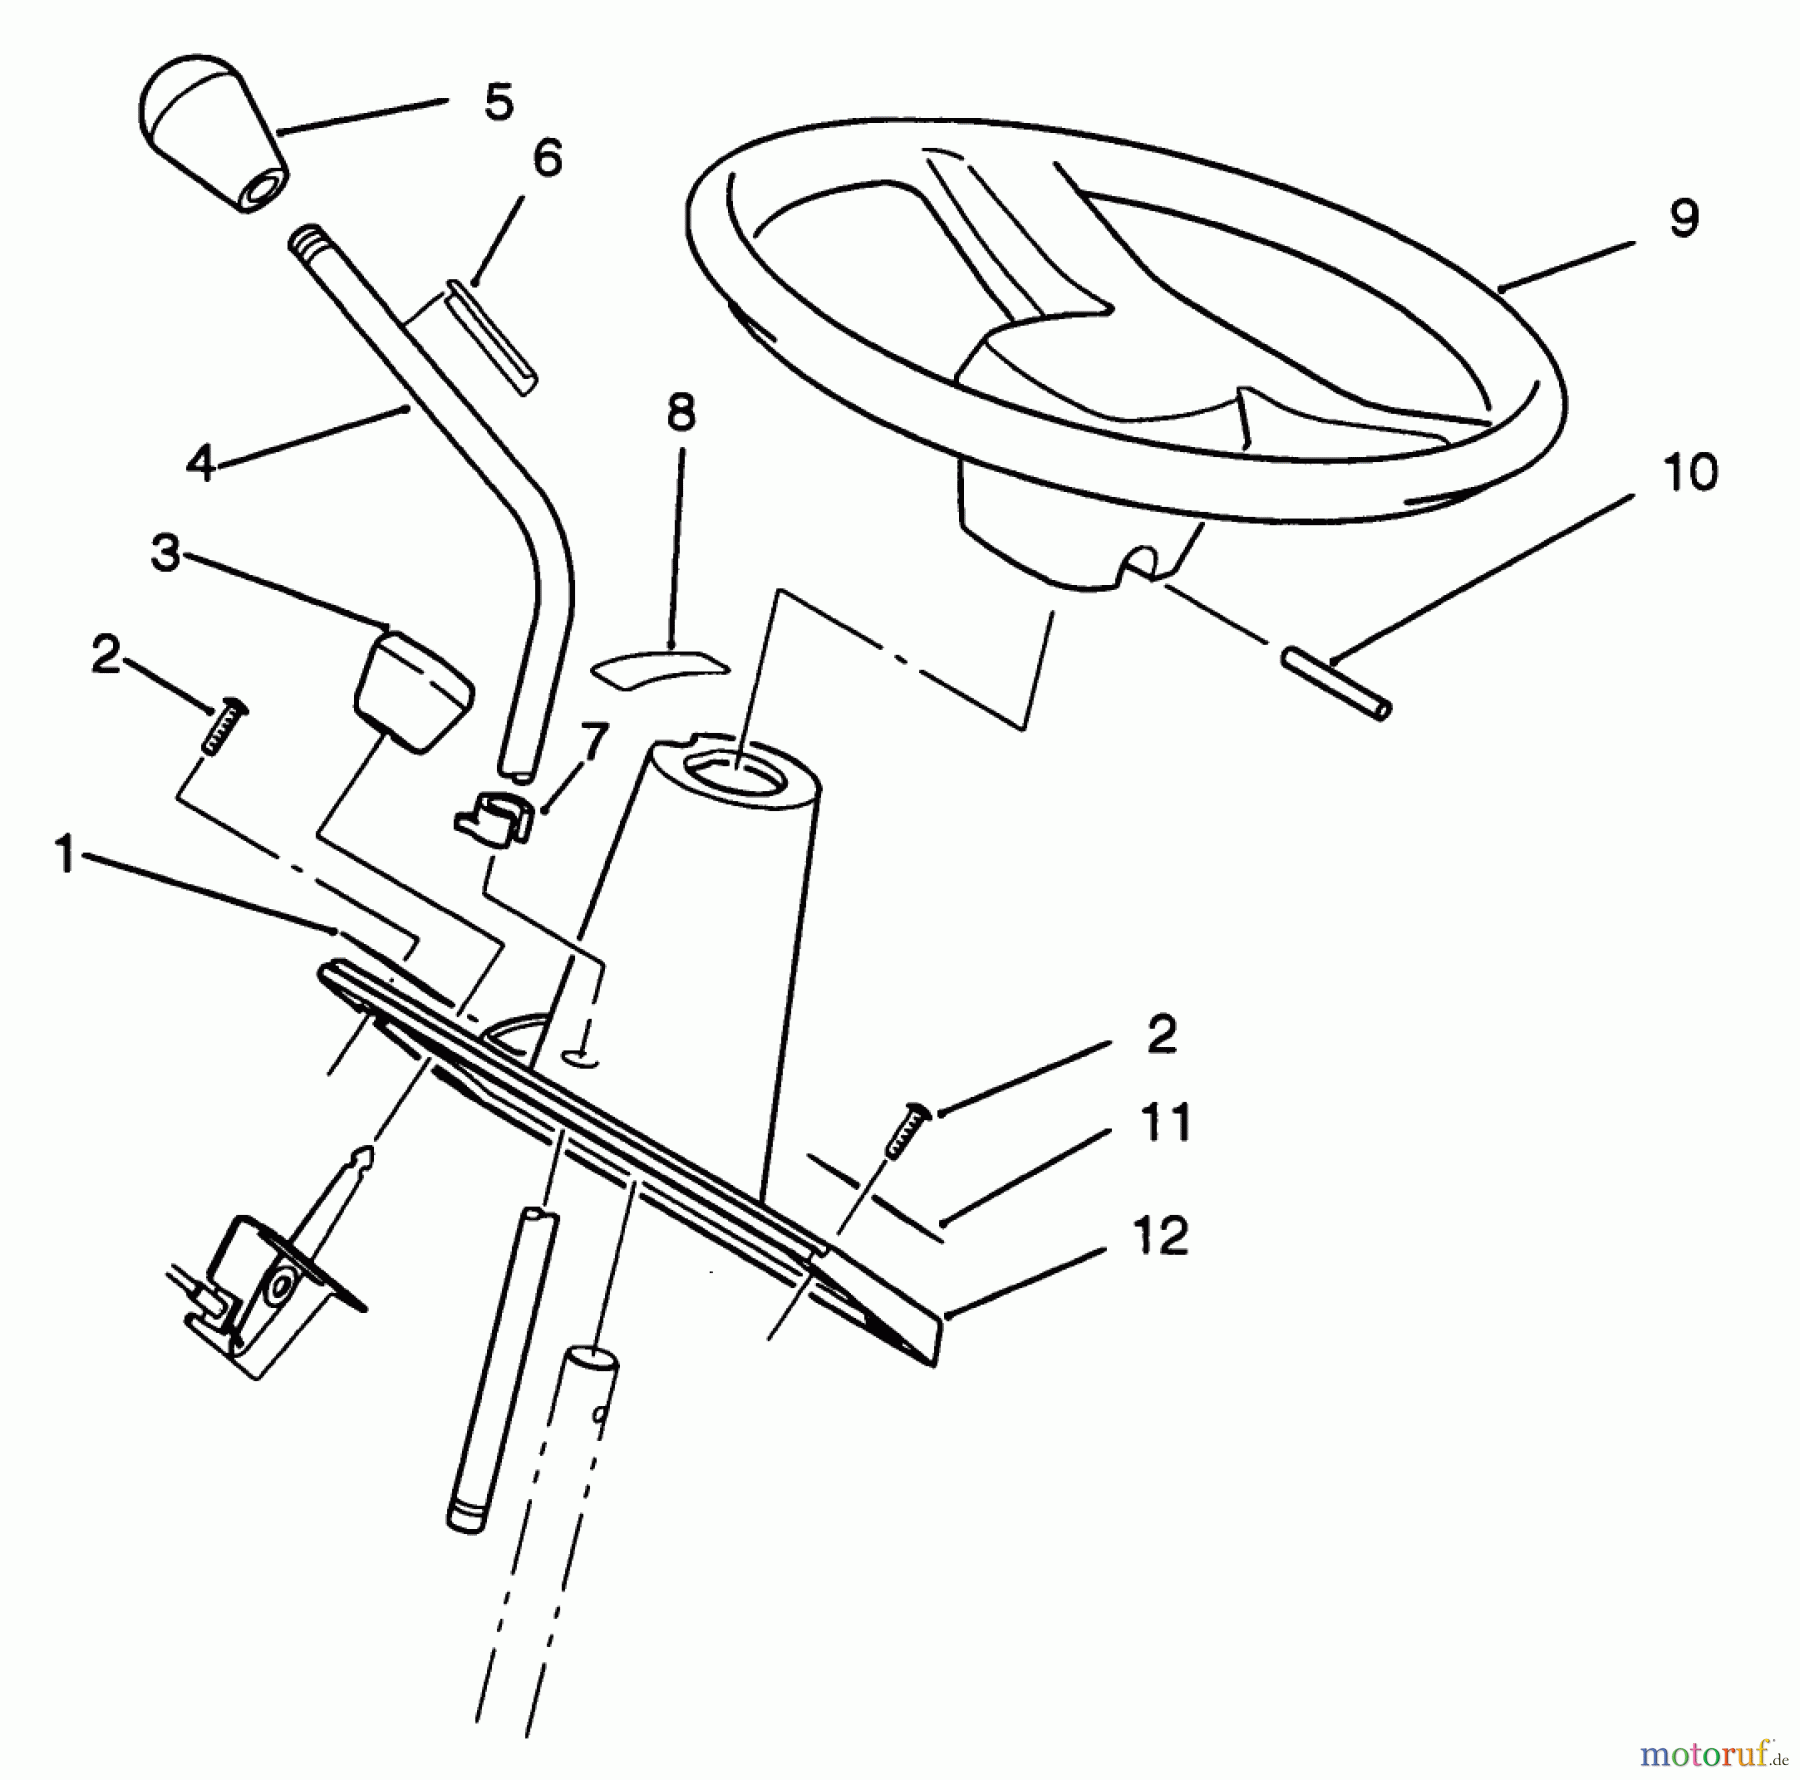  Toro Neu Mowers, Lawn & Garden Tractor Seite 2 R2-16BE01 (246-H) - Toro 246-H Yard Tractor, 1992 (2000001-2999999) STEERING WHEEL AND CONSOLE ASSEMBLY